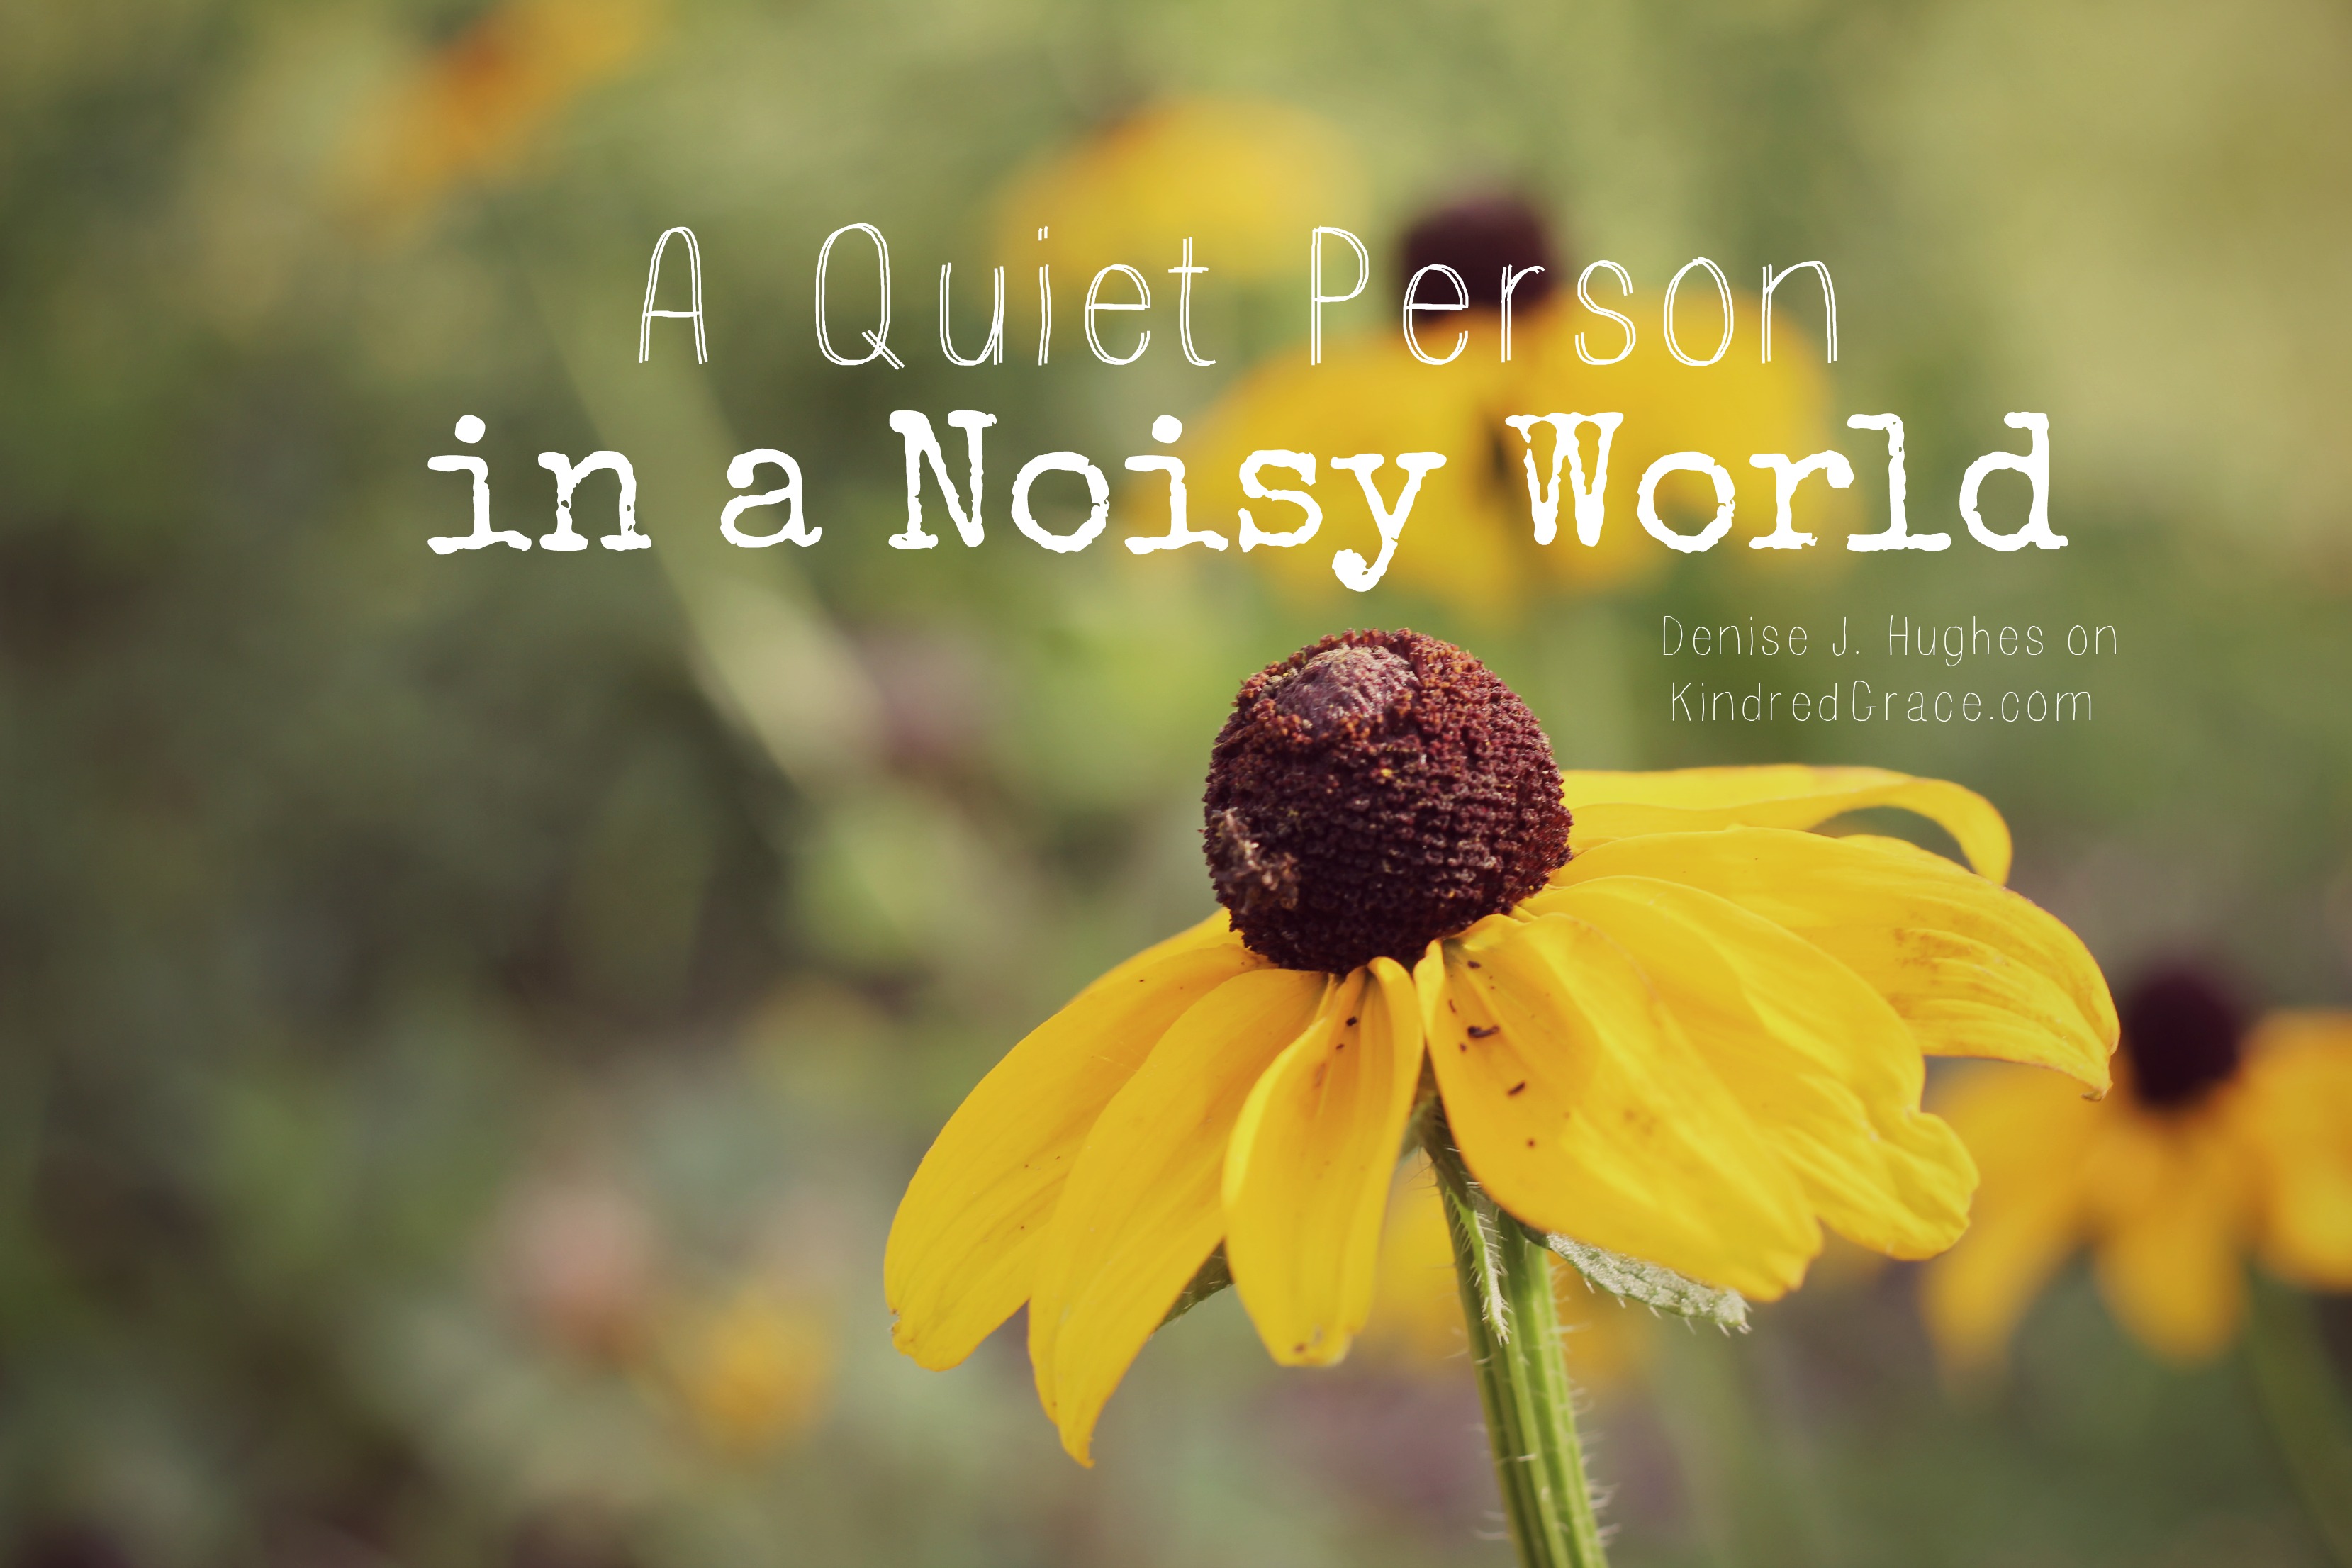 A Quiet Person in a Noisy World